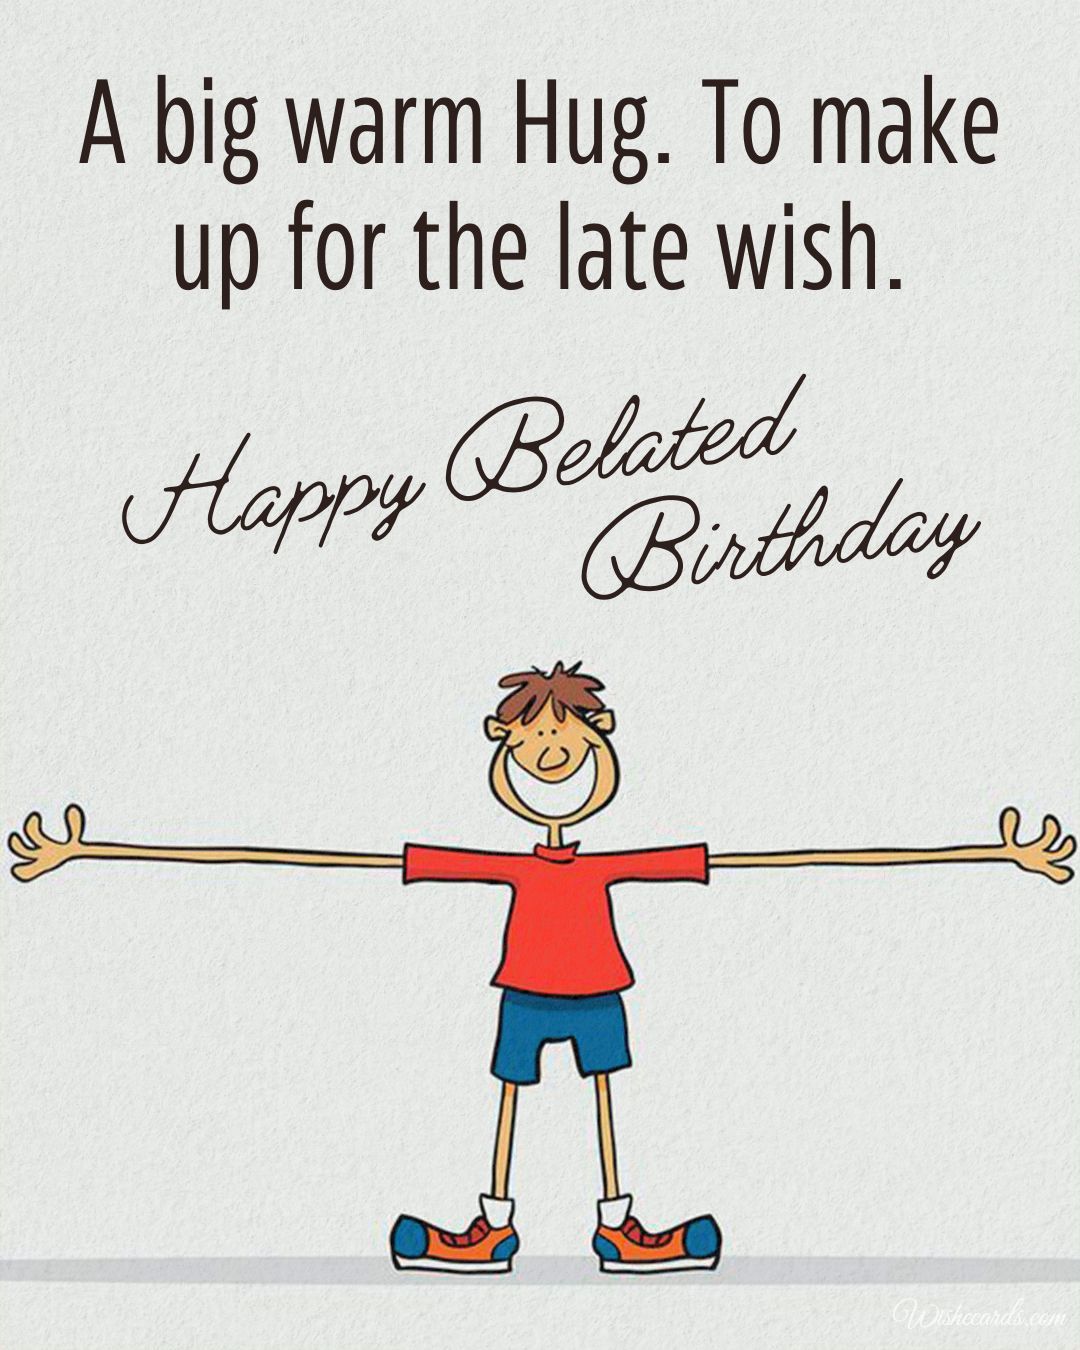 Belated Birthday E-card Funny